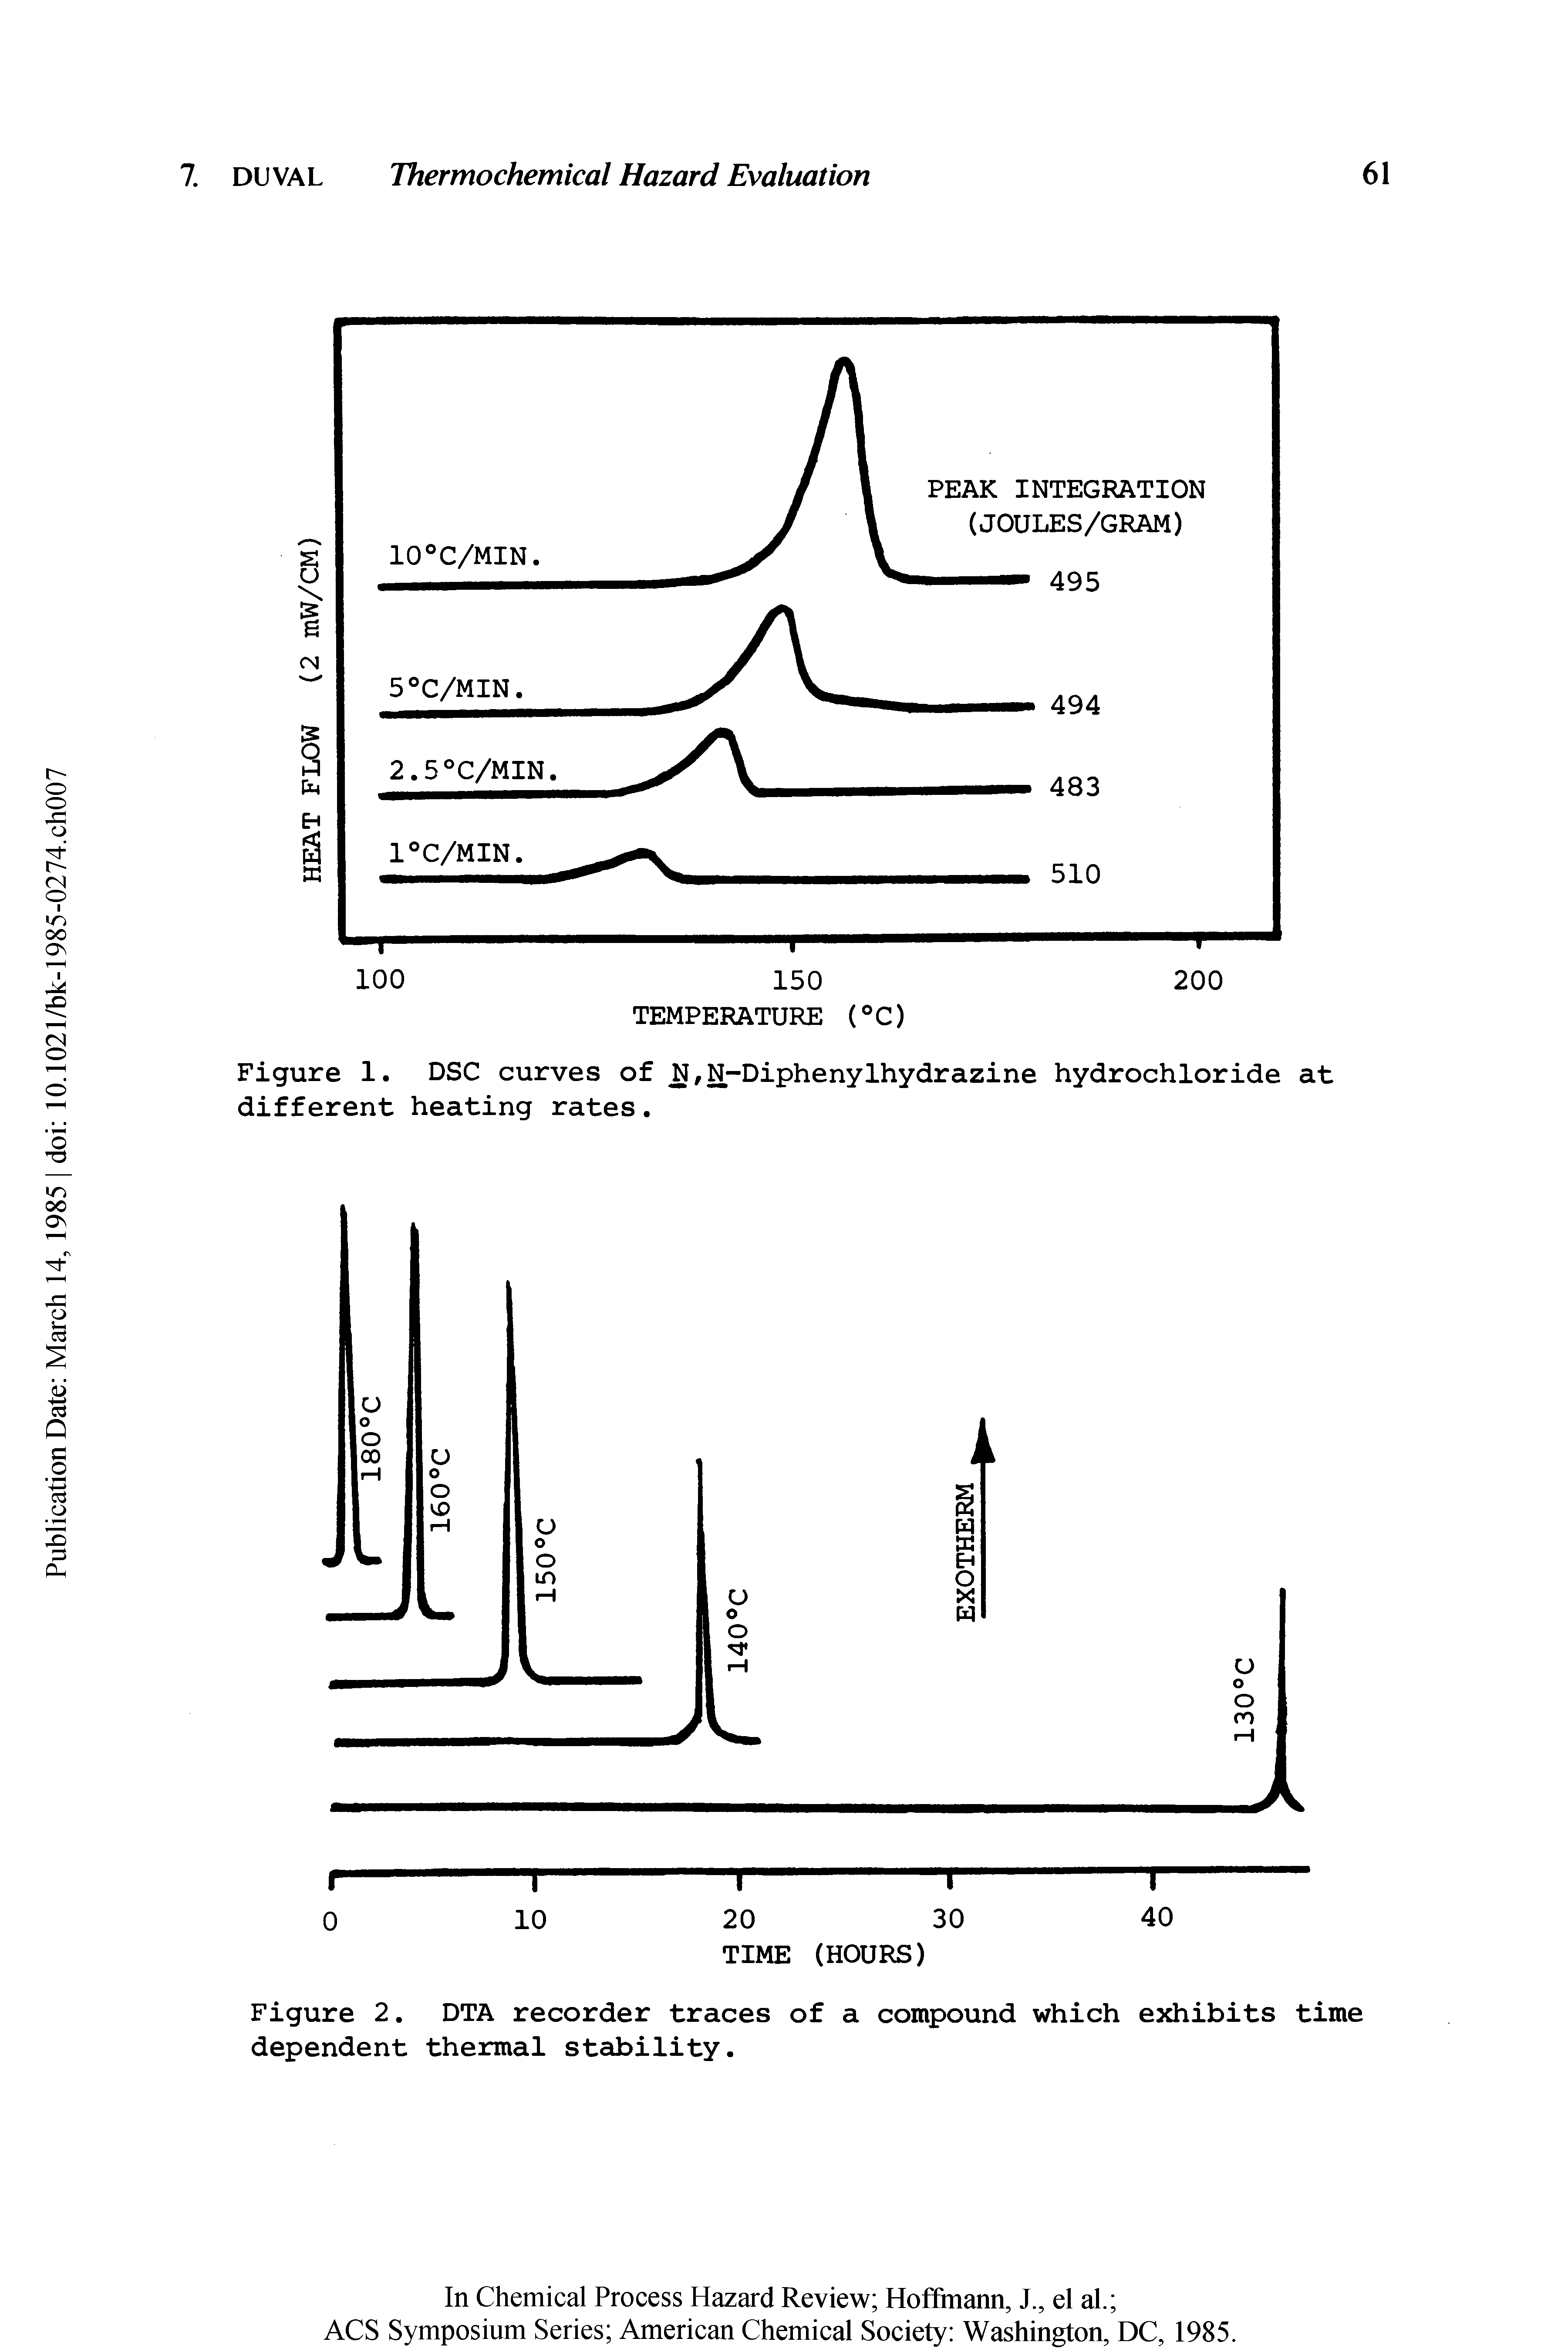 Figure 1. DSC curves of N,N-Diphenylhydrazine hydrochloride at different heating rates.